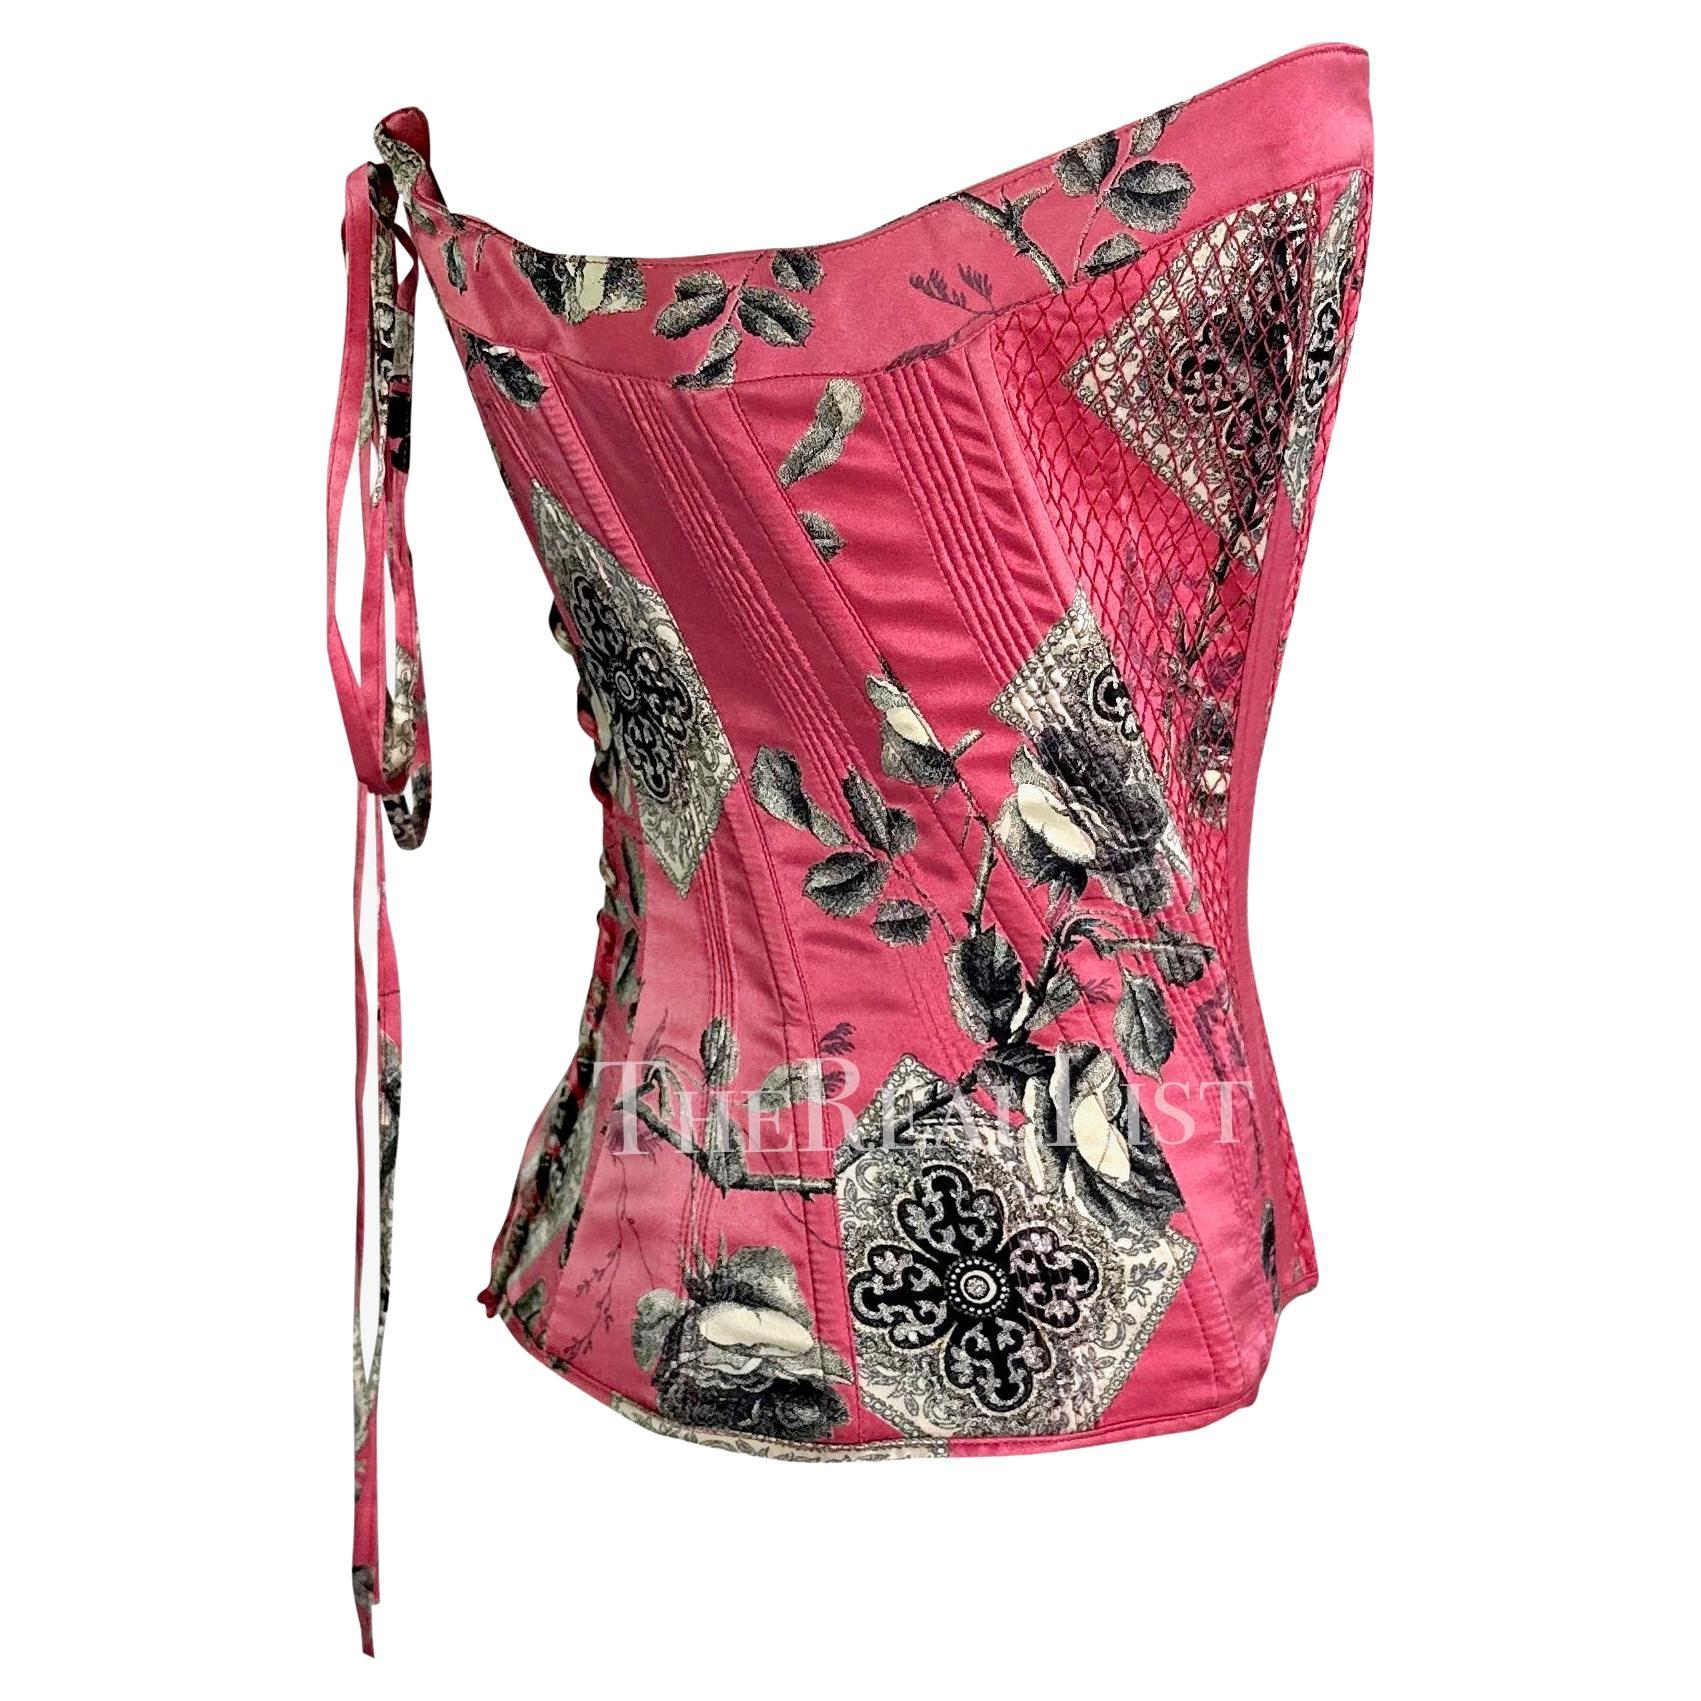 2004 Roberto Cavalli Pink Floral Quilted Silk Lace-Up Corset Bustier Top For Sale 2